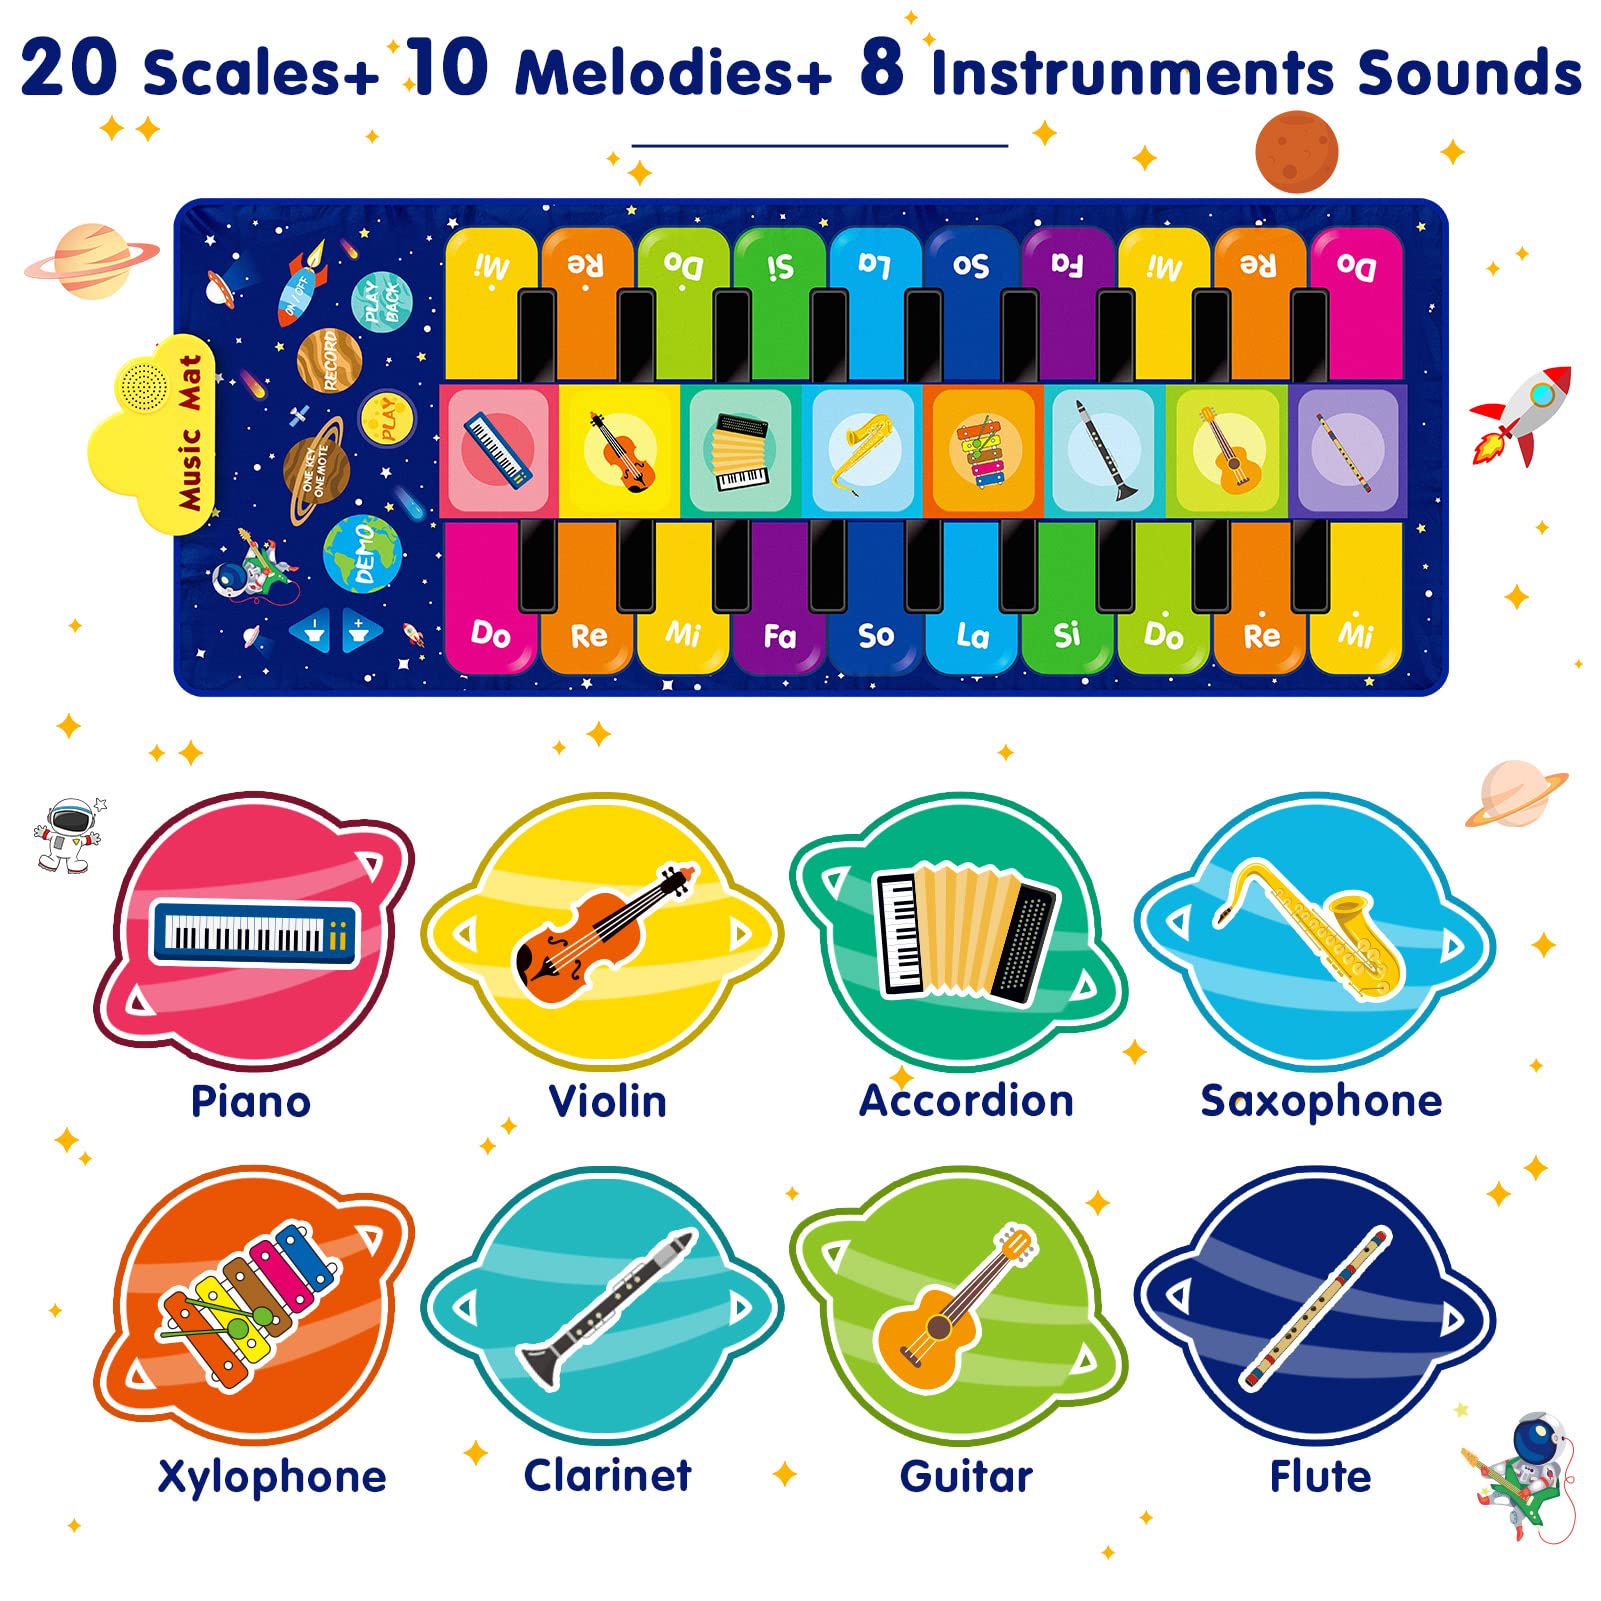 Piano Mat Music Toys with 20 Musical Keys, 10 Songs, 8 Instrument Sounds, Baby Dance Mat Piano Play Mat Portable Blanket Build-In Speaker & Recording Function for Kids Toddlers Girls Boys Ages 4-8